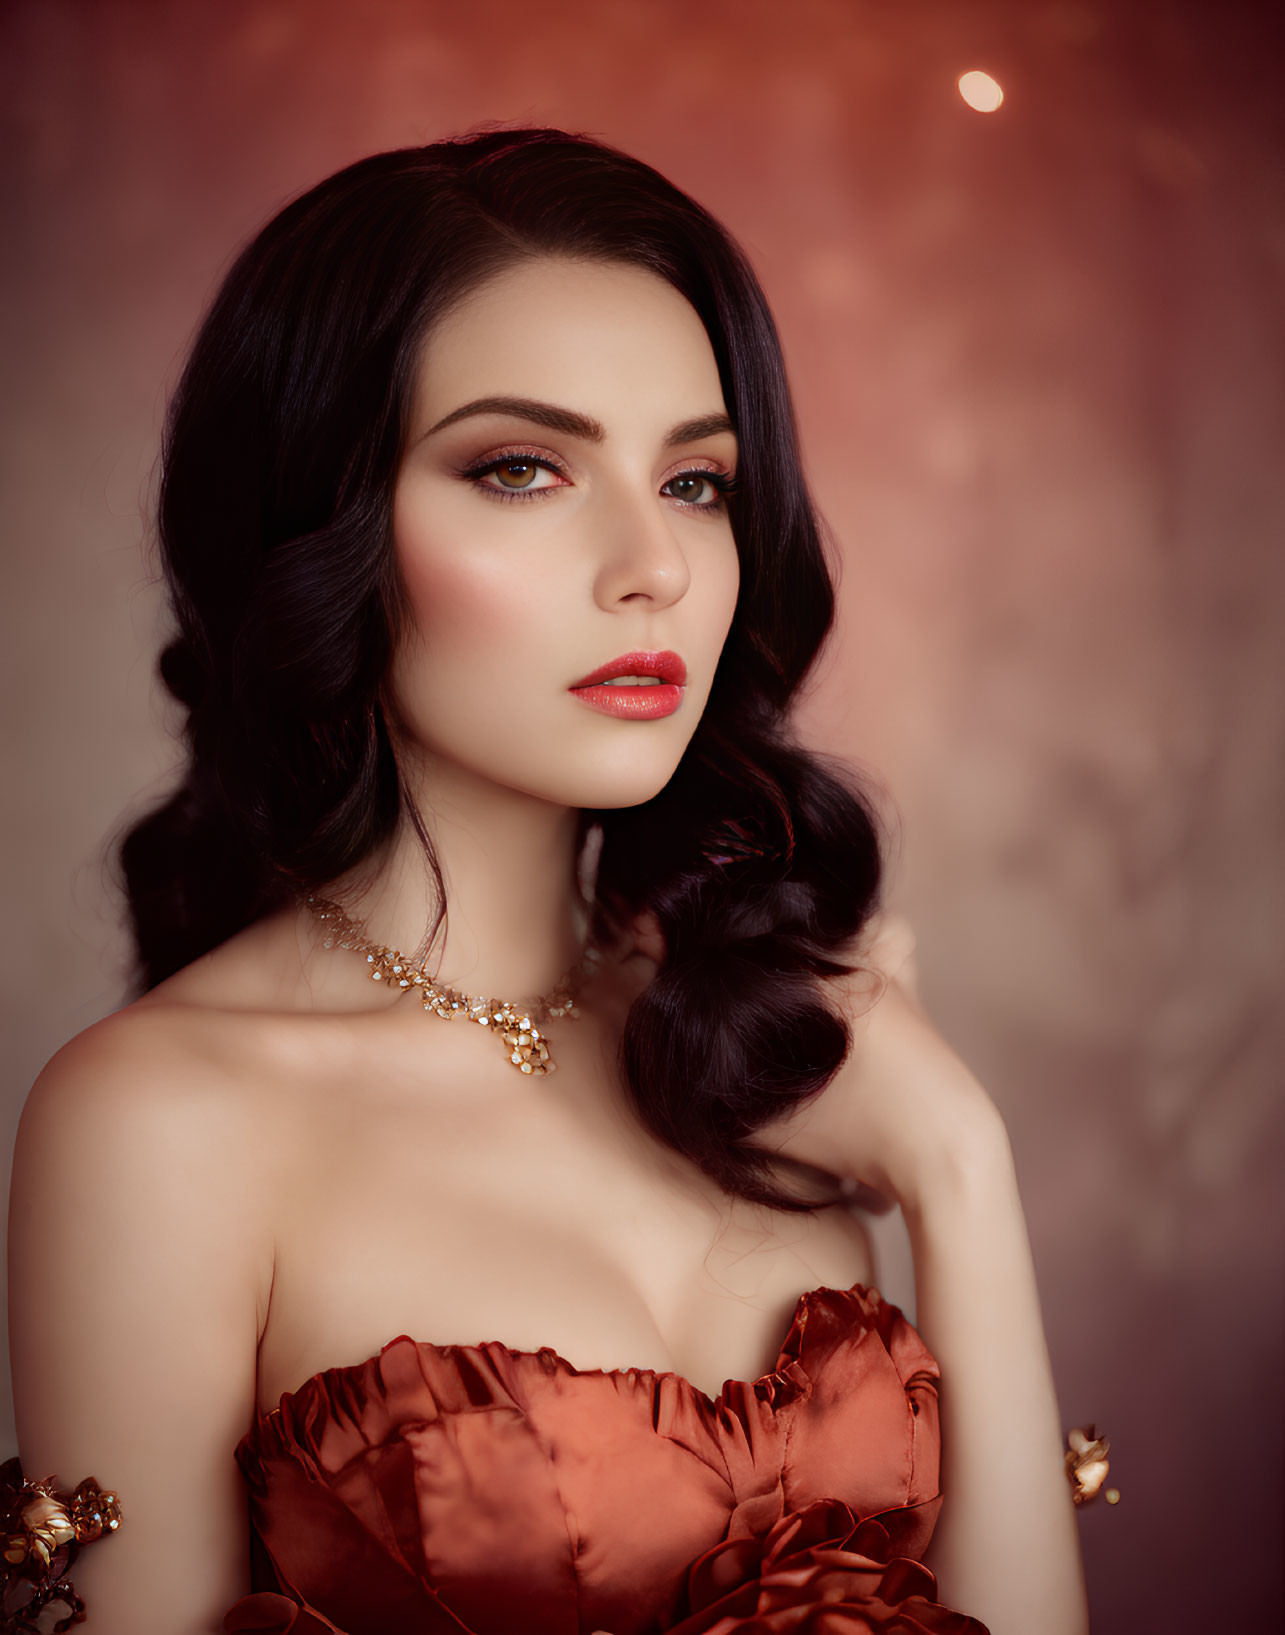 Dark-haired woman in red lipstick and dress posing elegantly on soft red backdrop.